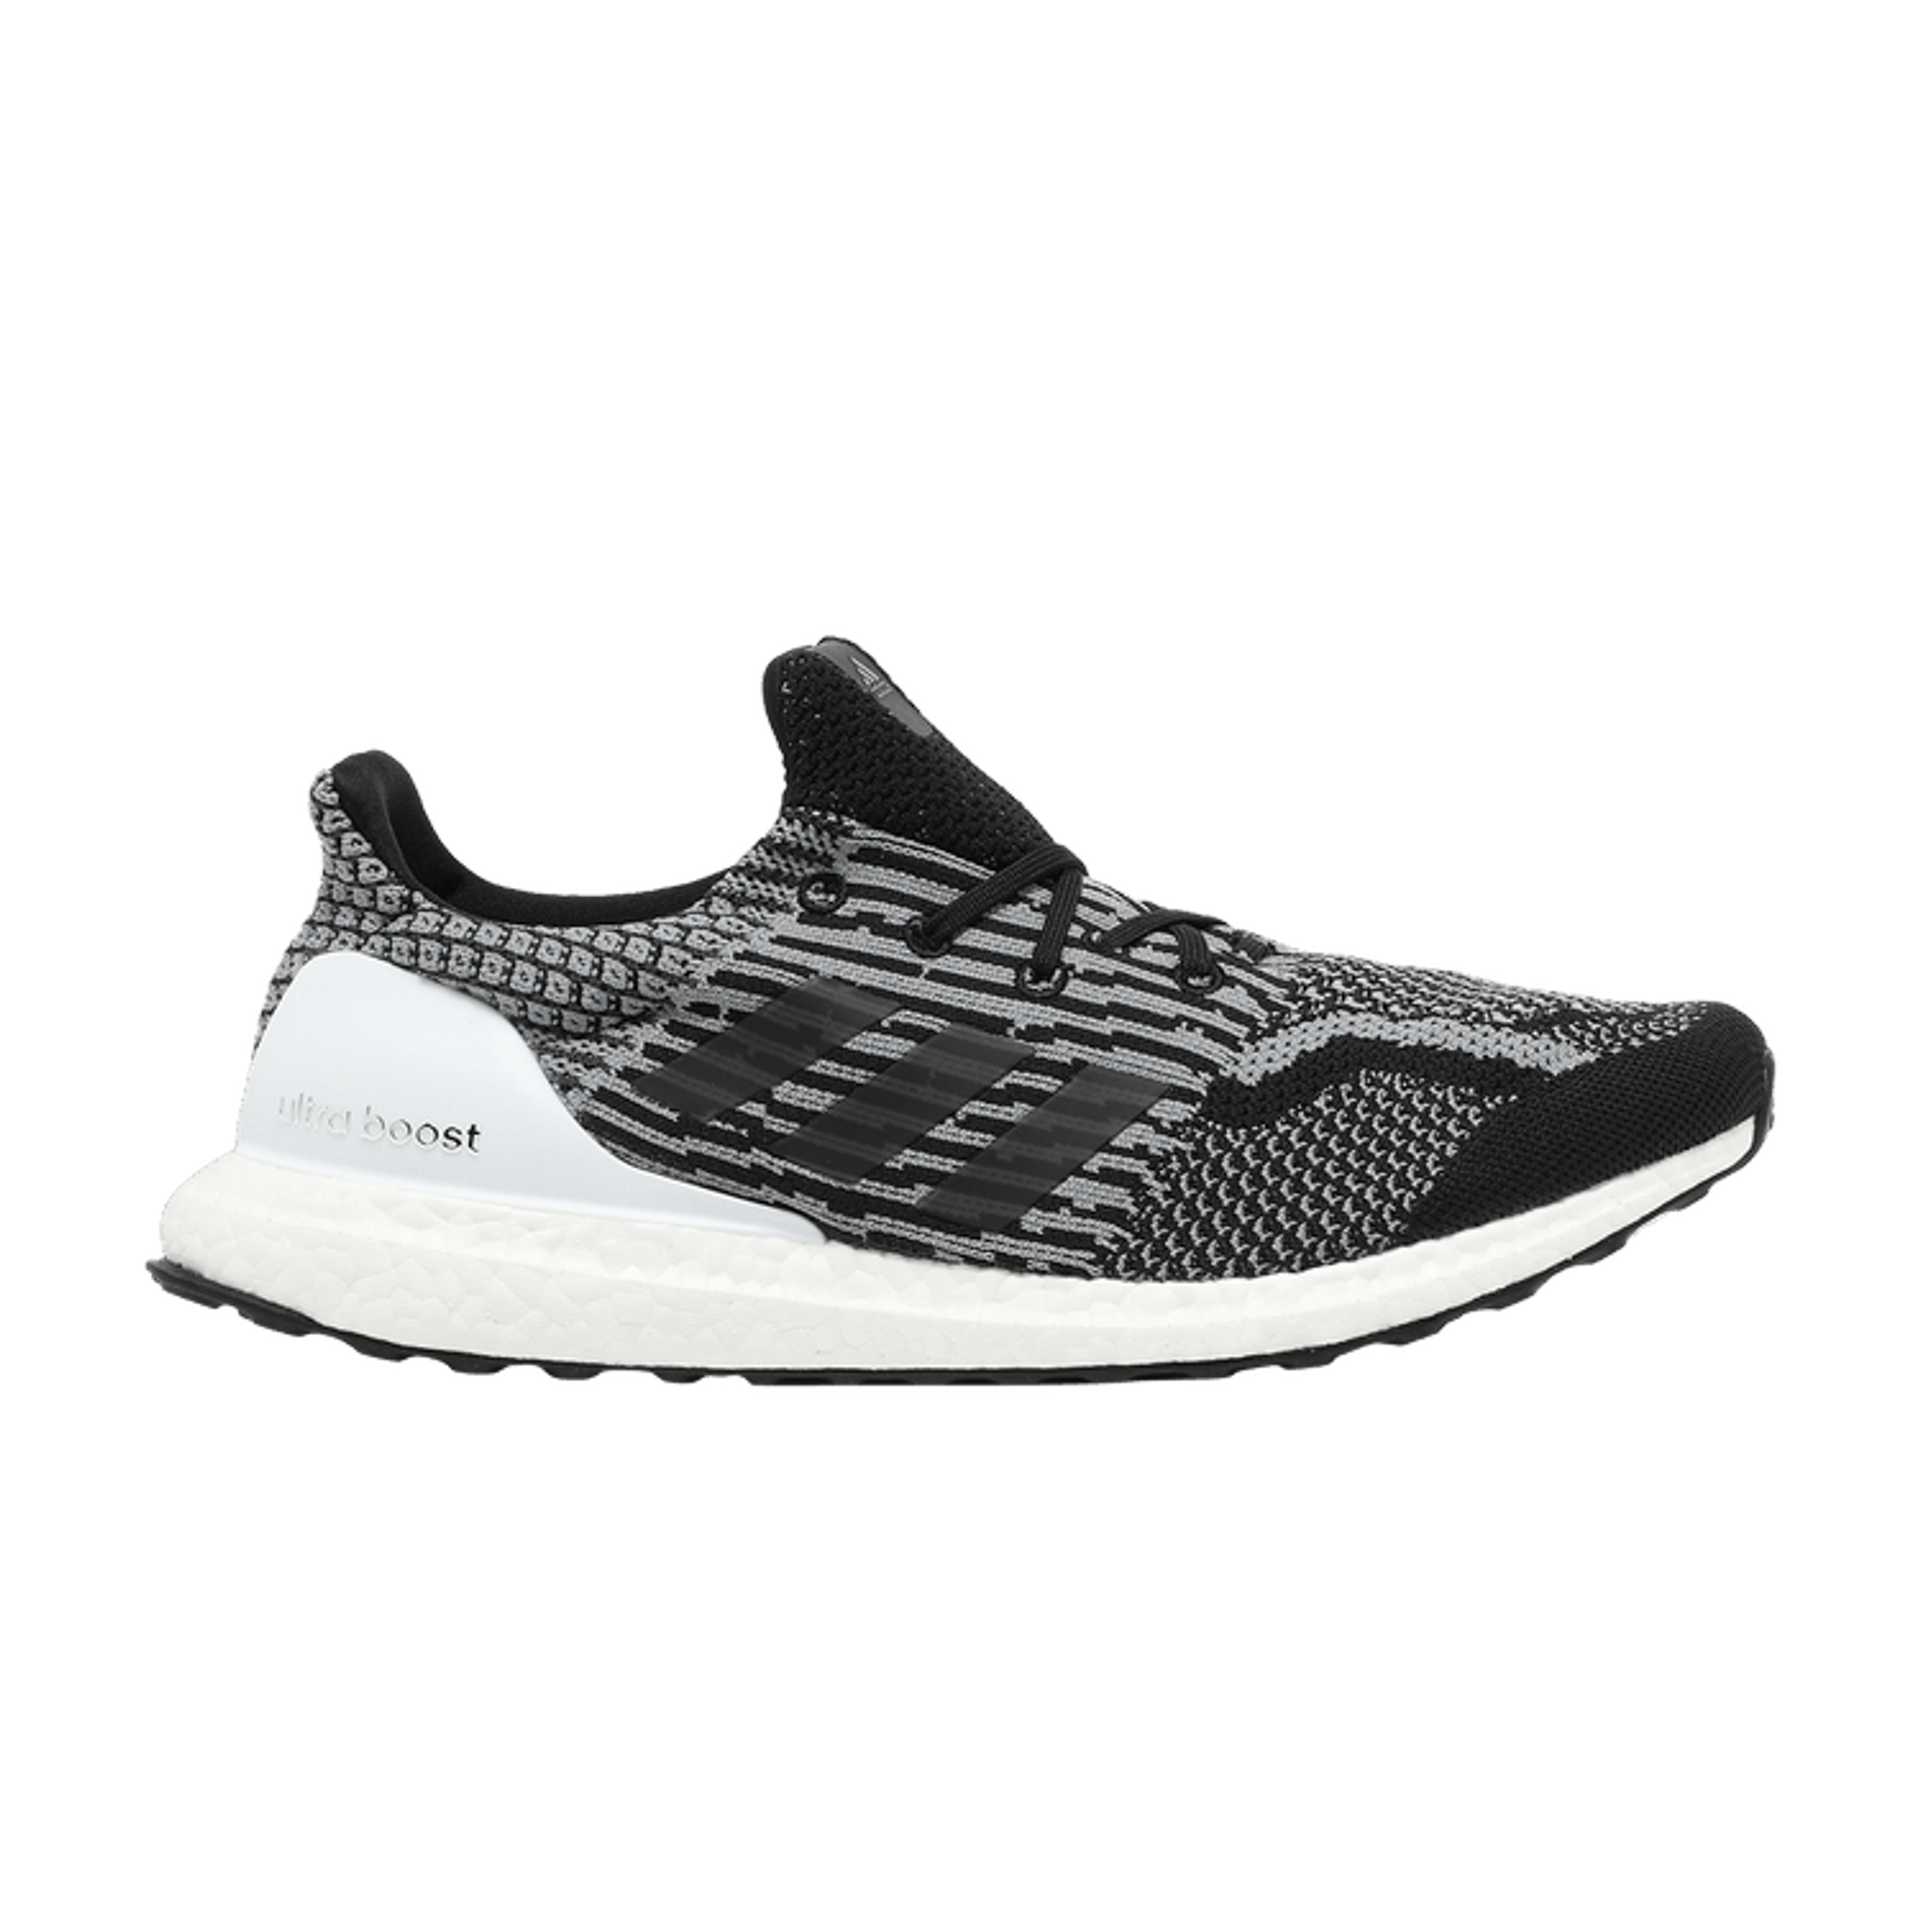 UltraBoost 5.0 Uncaged DNA 'Oreo'